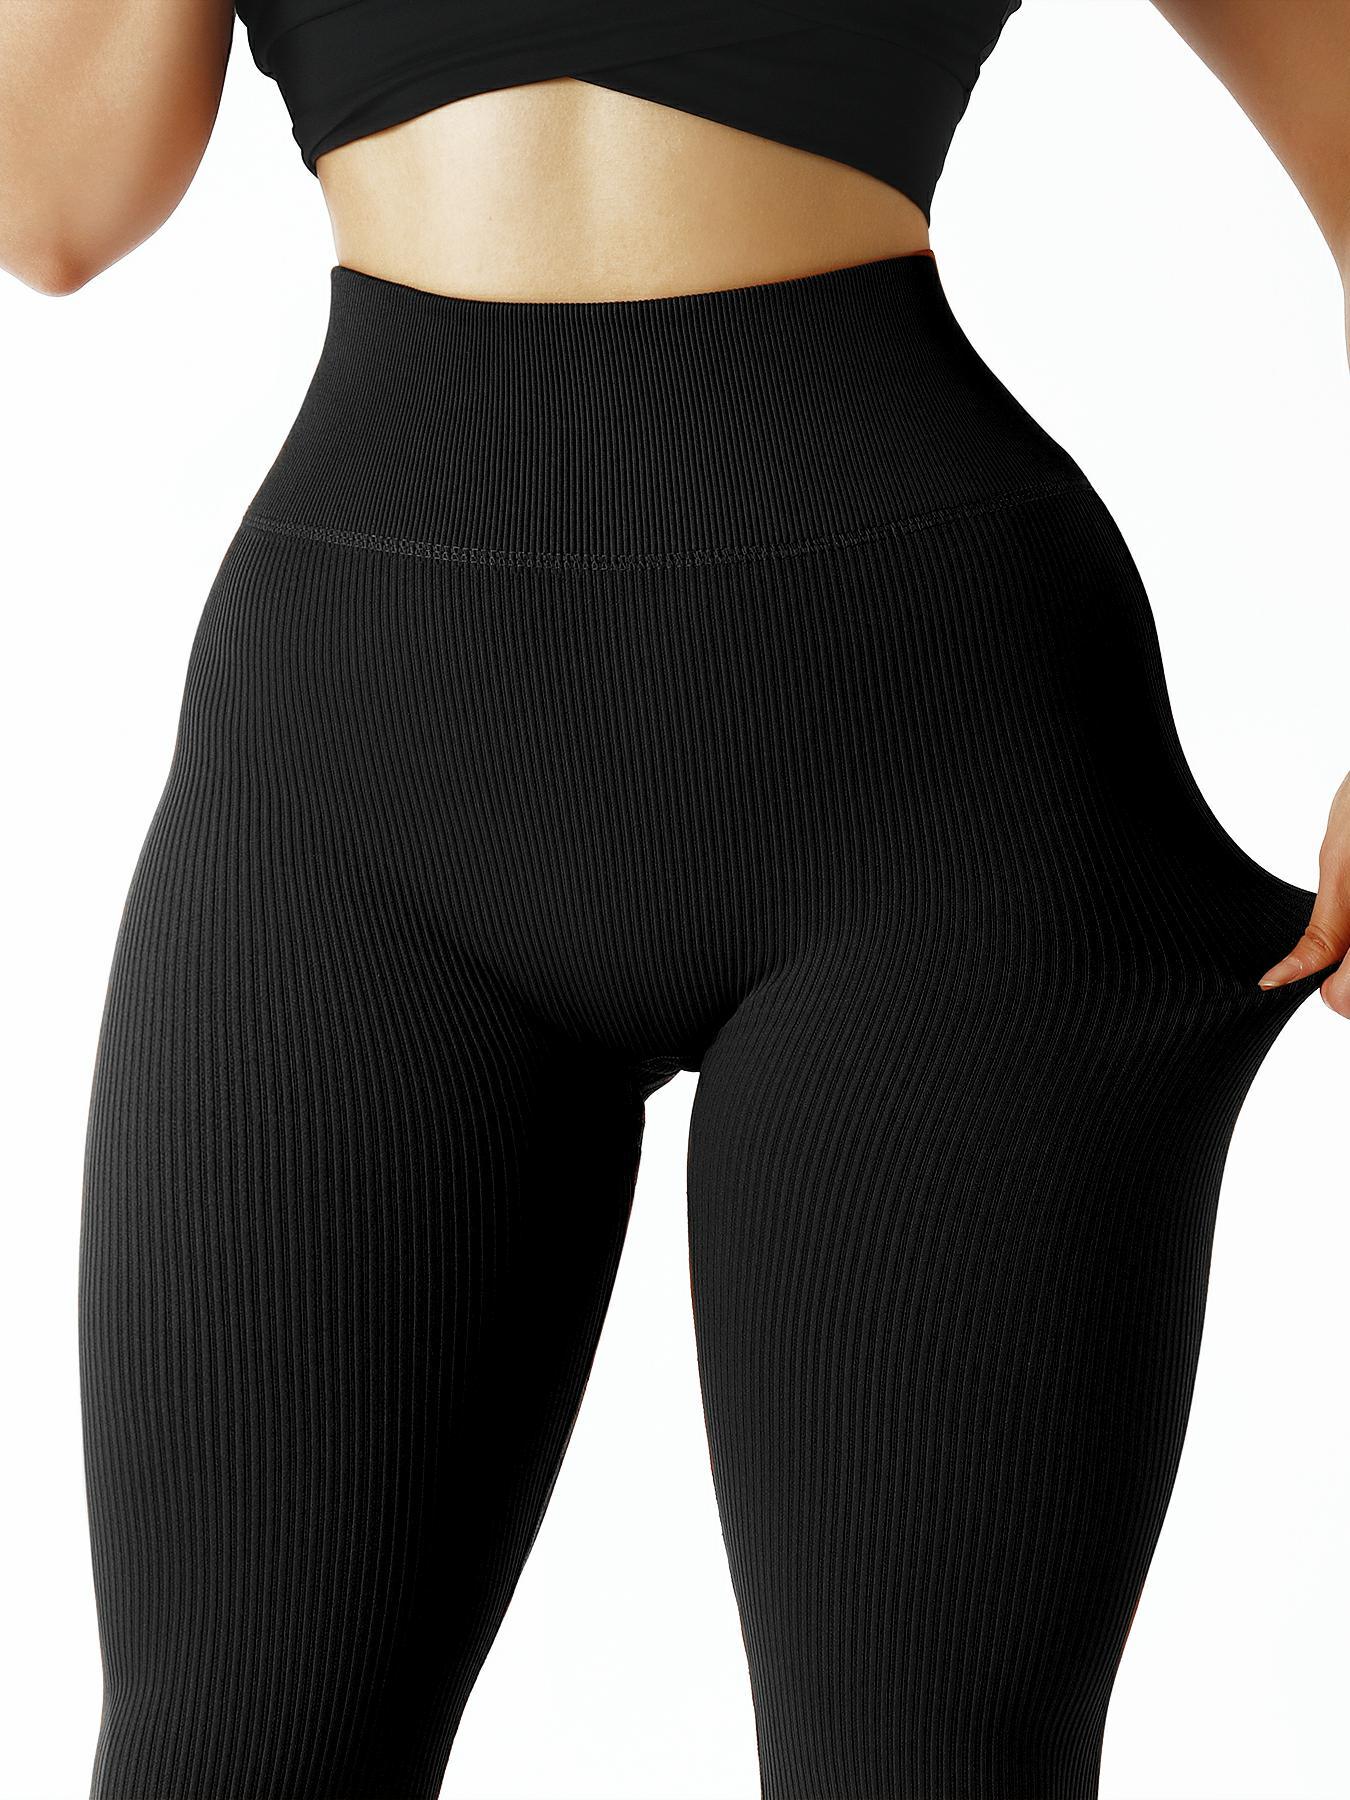 Savvi Leggings Womens XS/S Mantra Mid Rise Seamless Compression Cut Out 